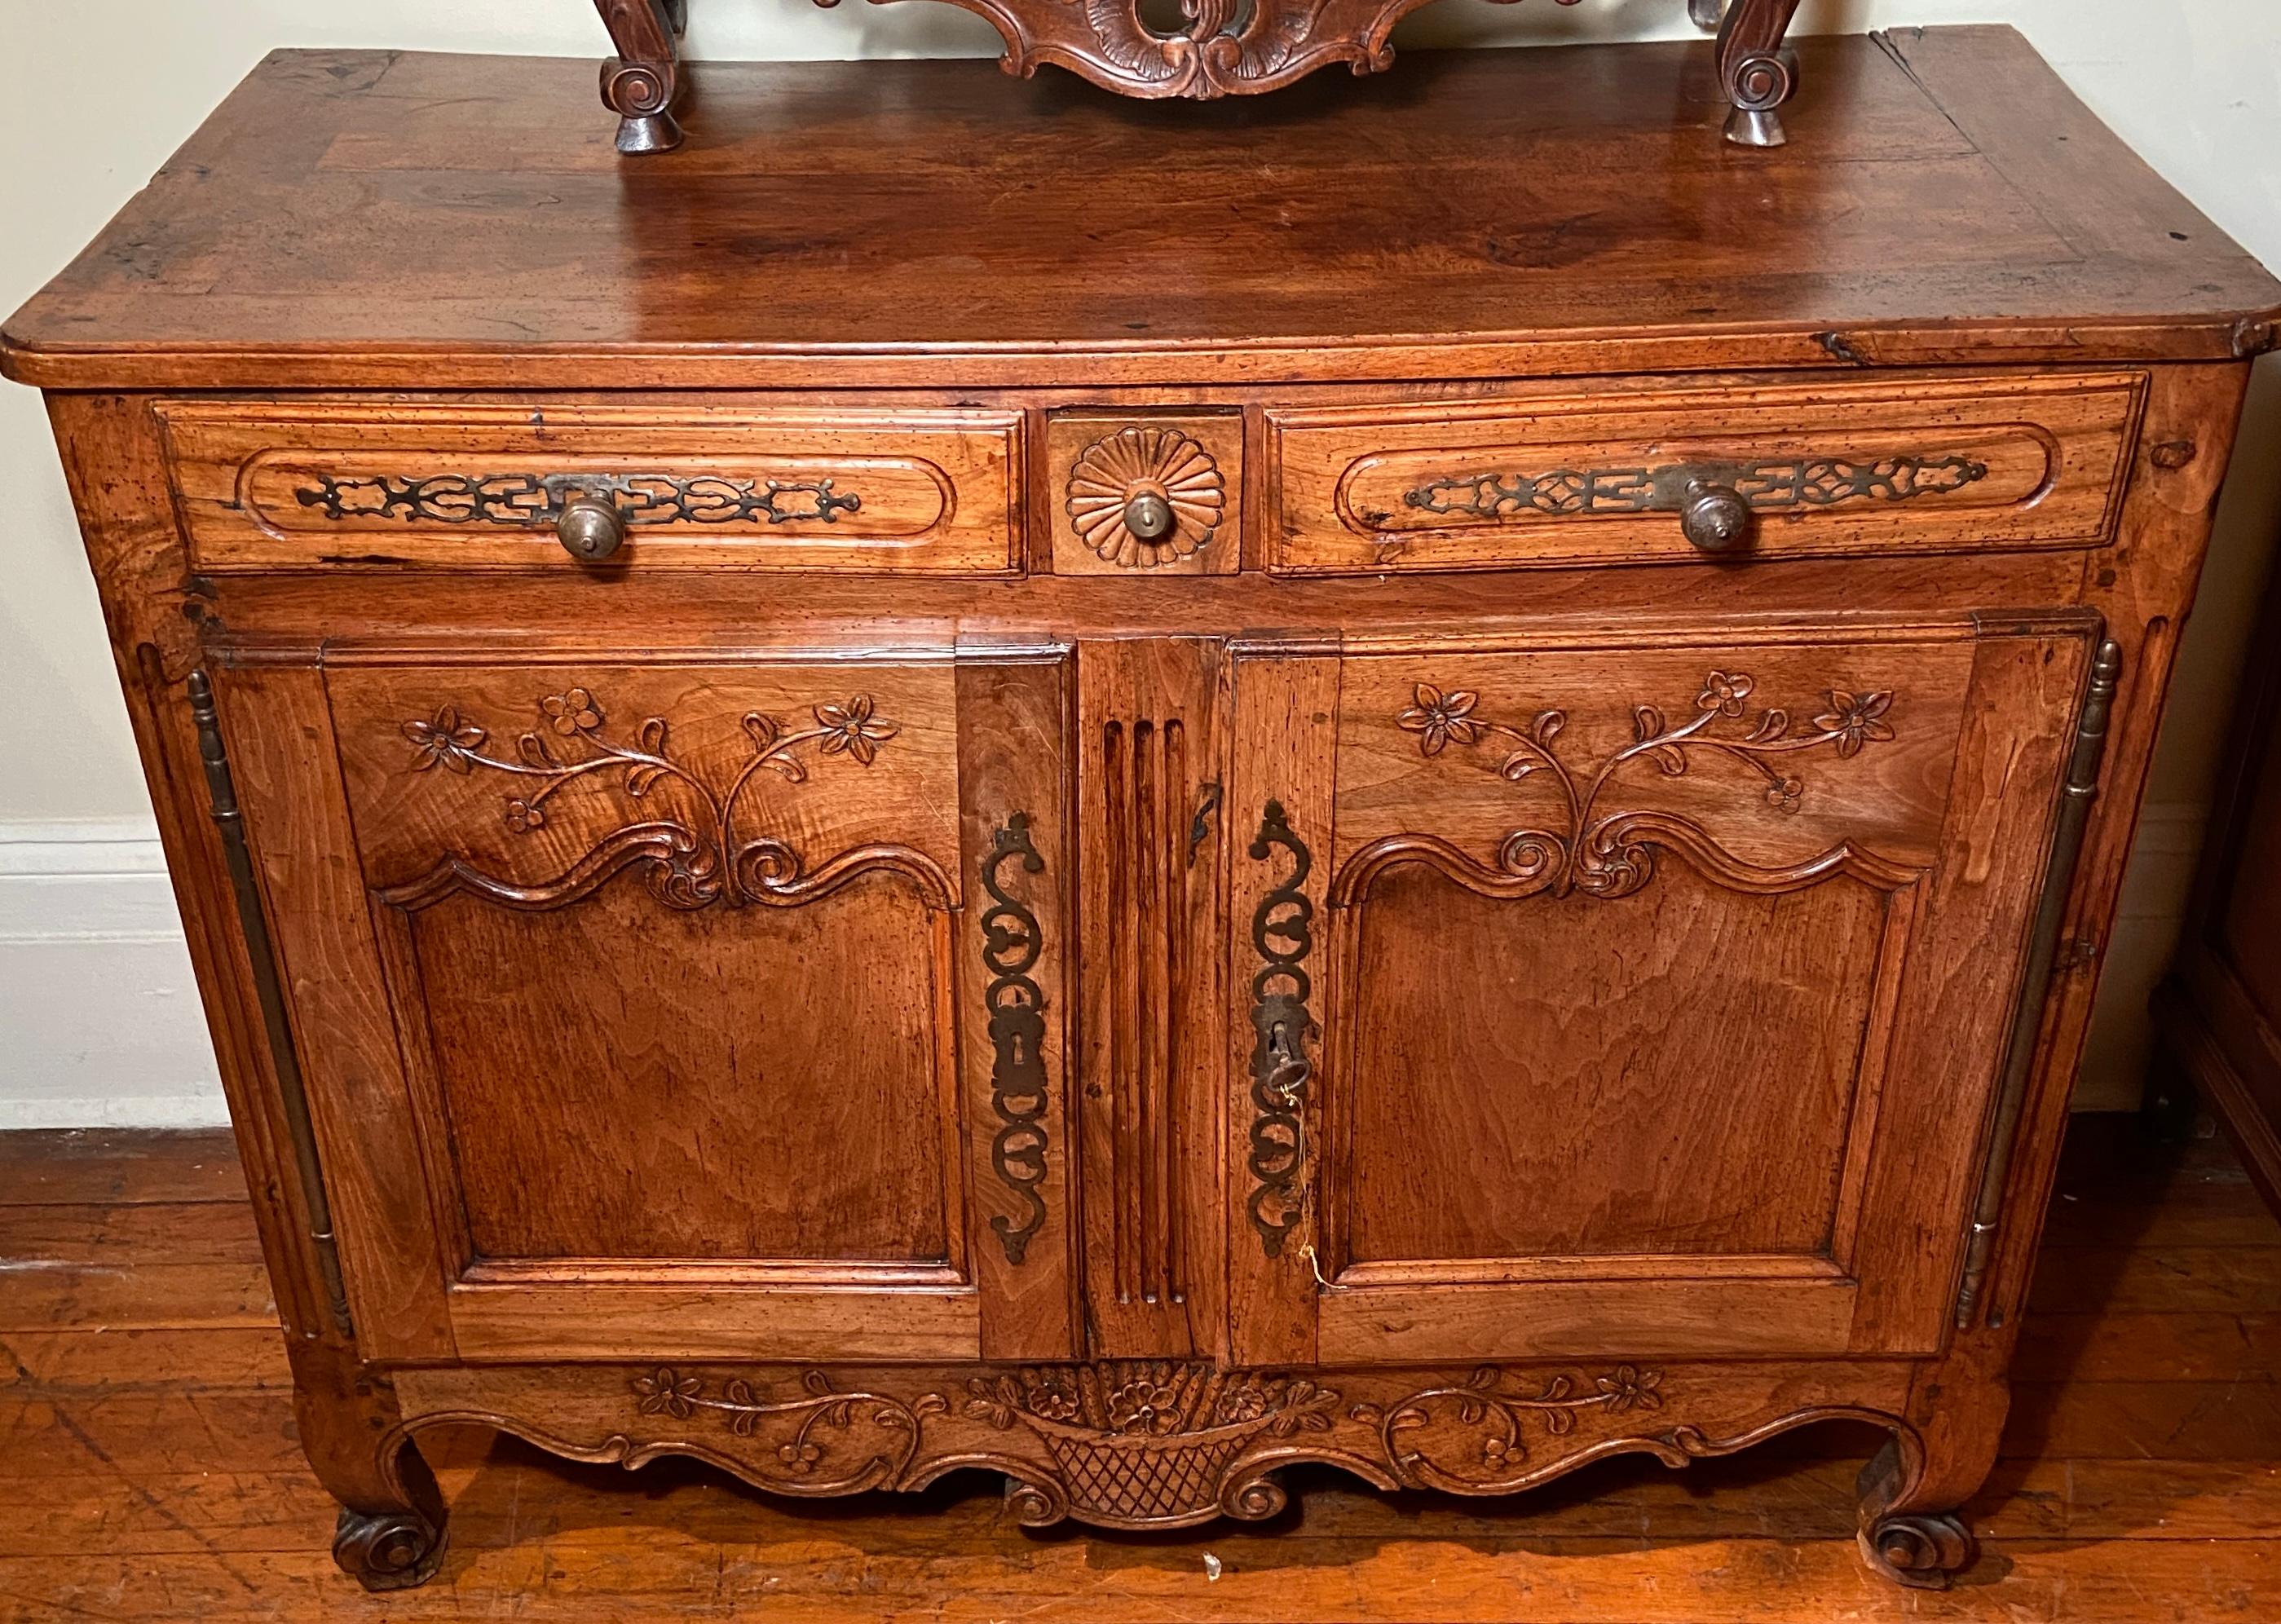 Antique early 19th century French carved fruitwood commode.
Beautiful hardware and carving.